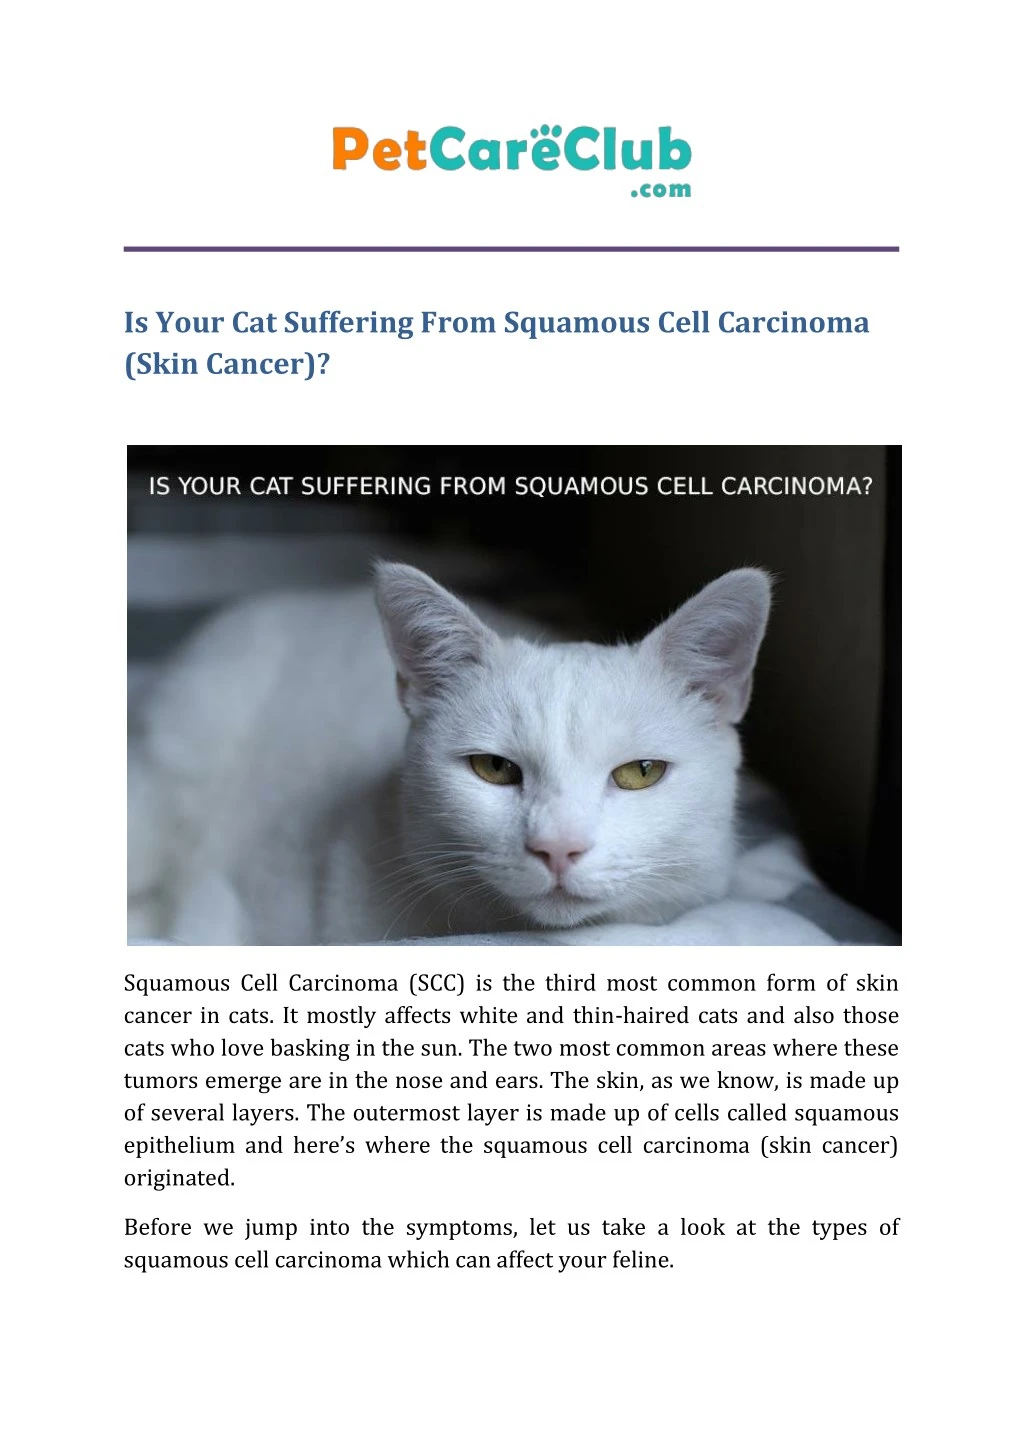 is your cat suffering from squamous cell